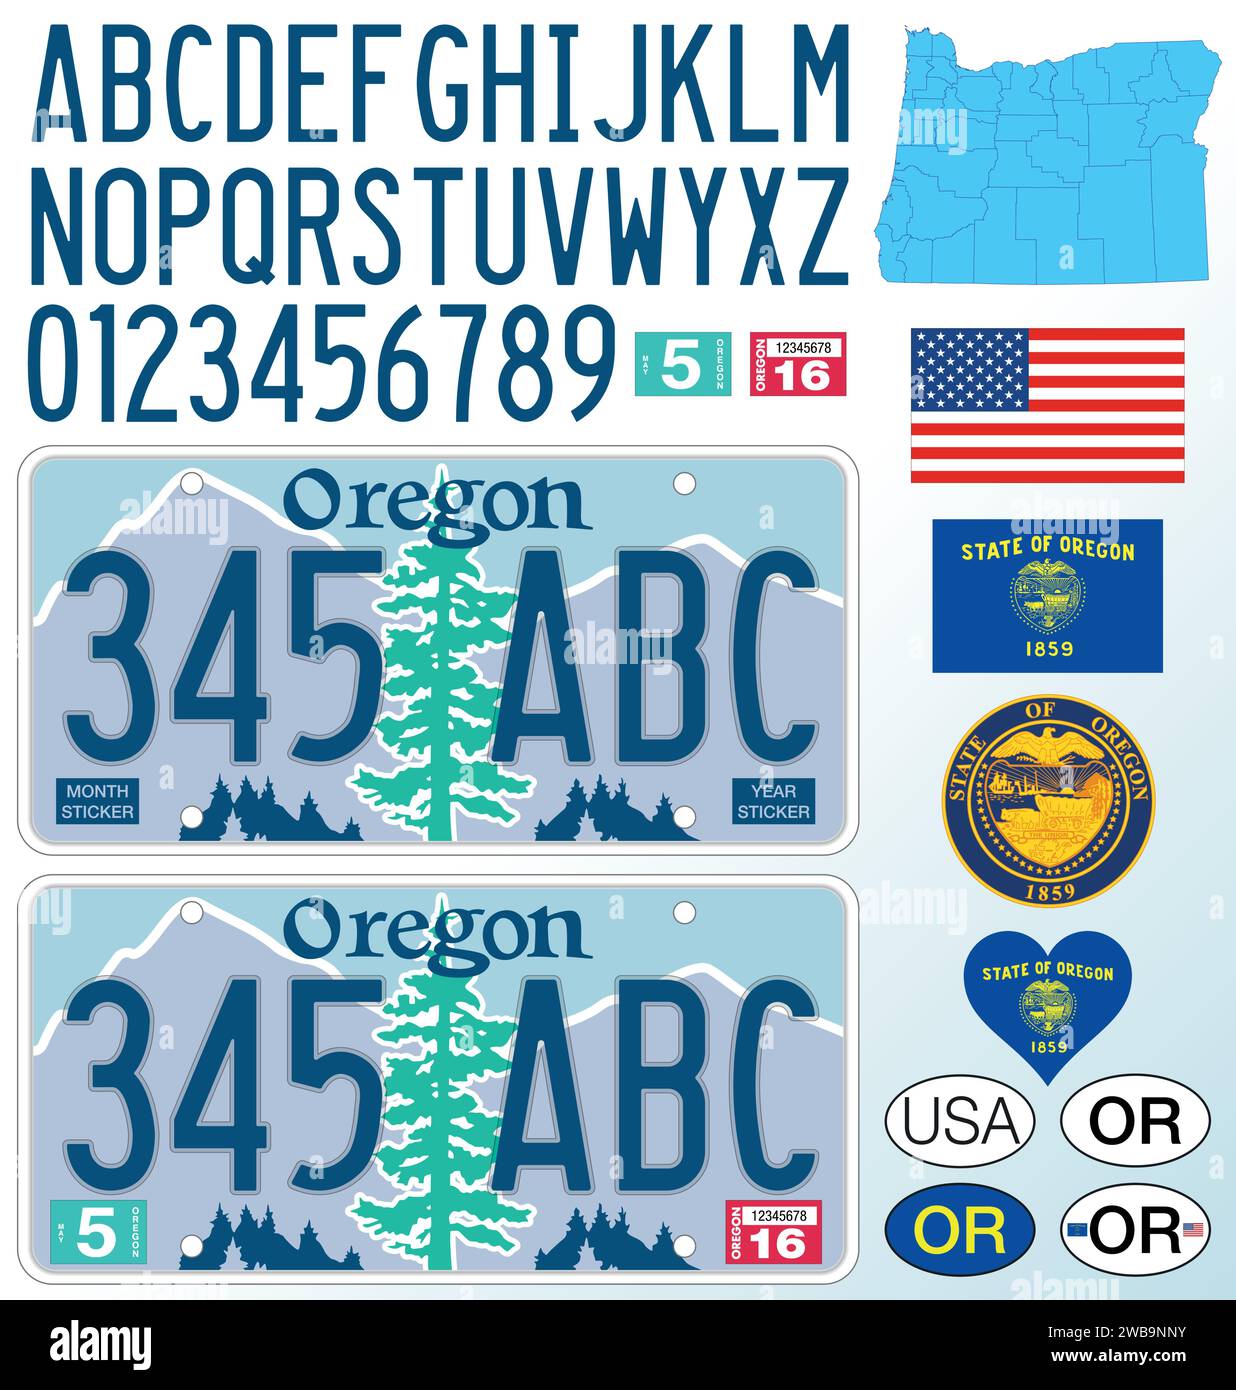 Oregon state car license plate pattern, letters, numbers and symbols, vector illustration, USA, United States odf America Stock Vector